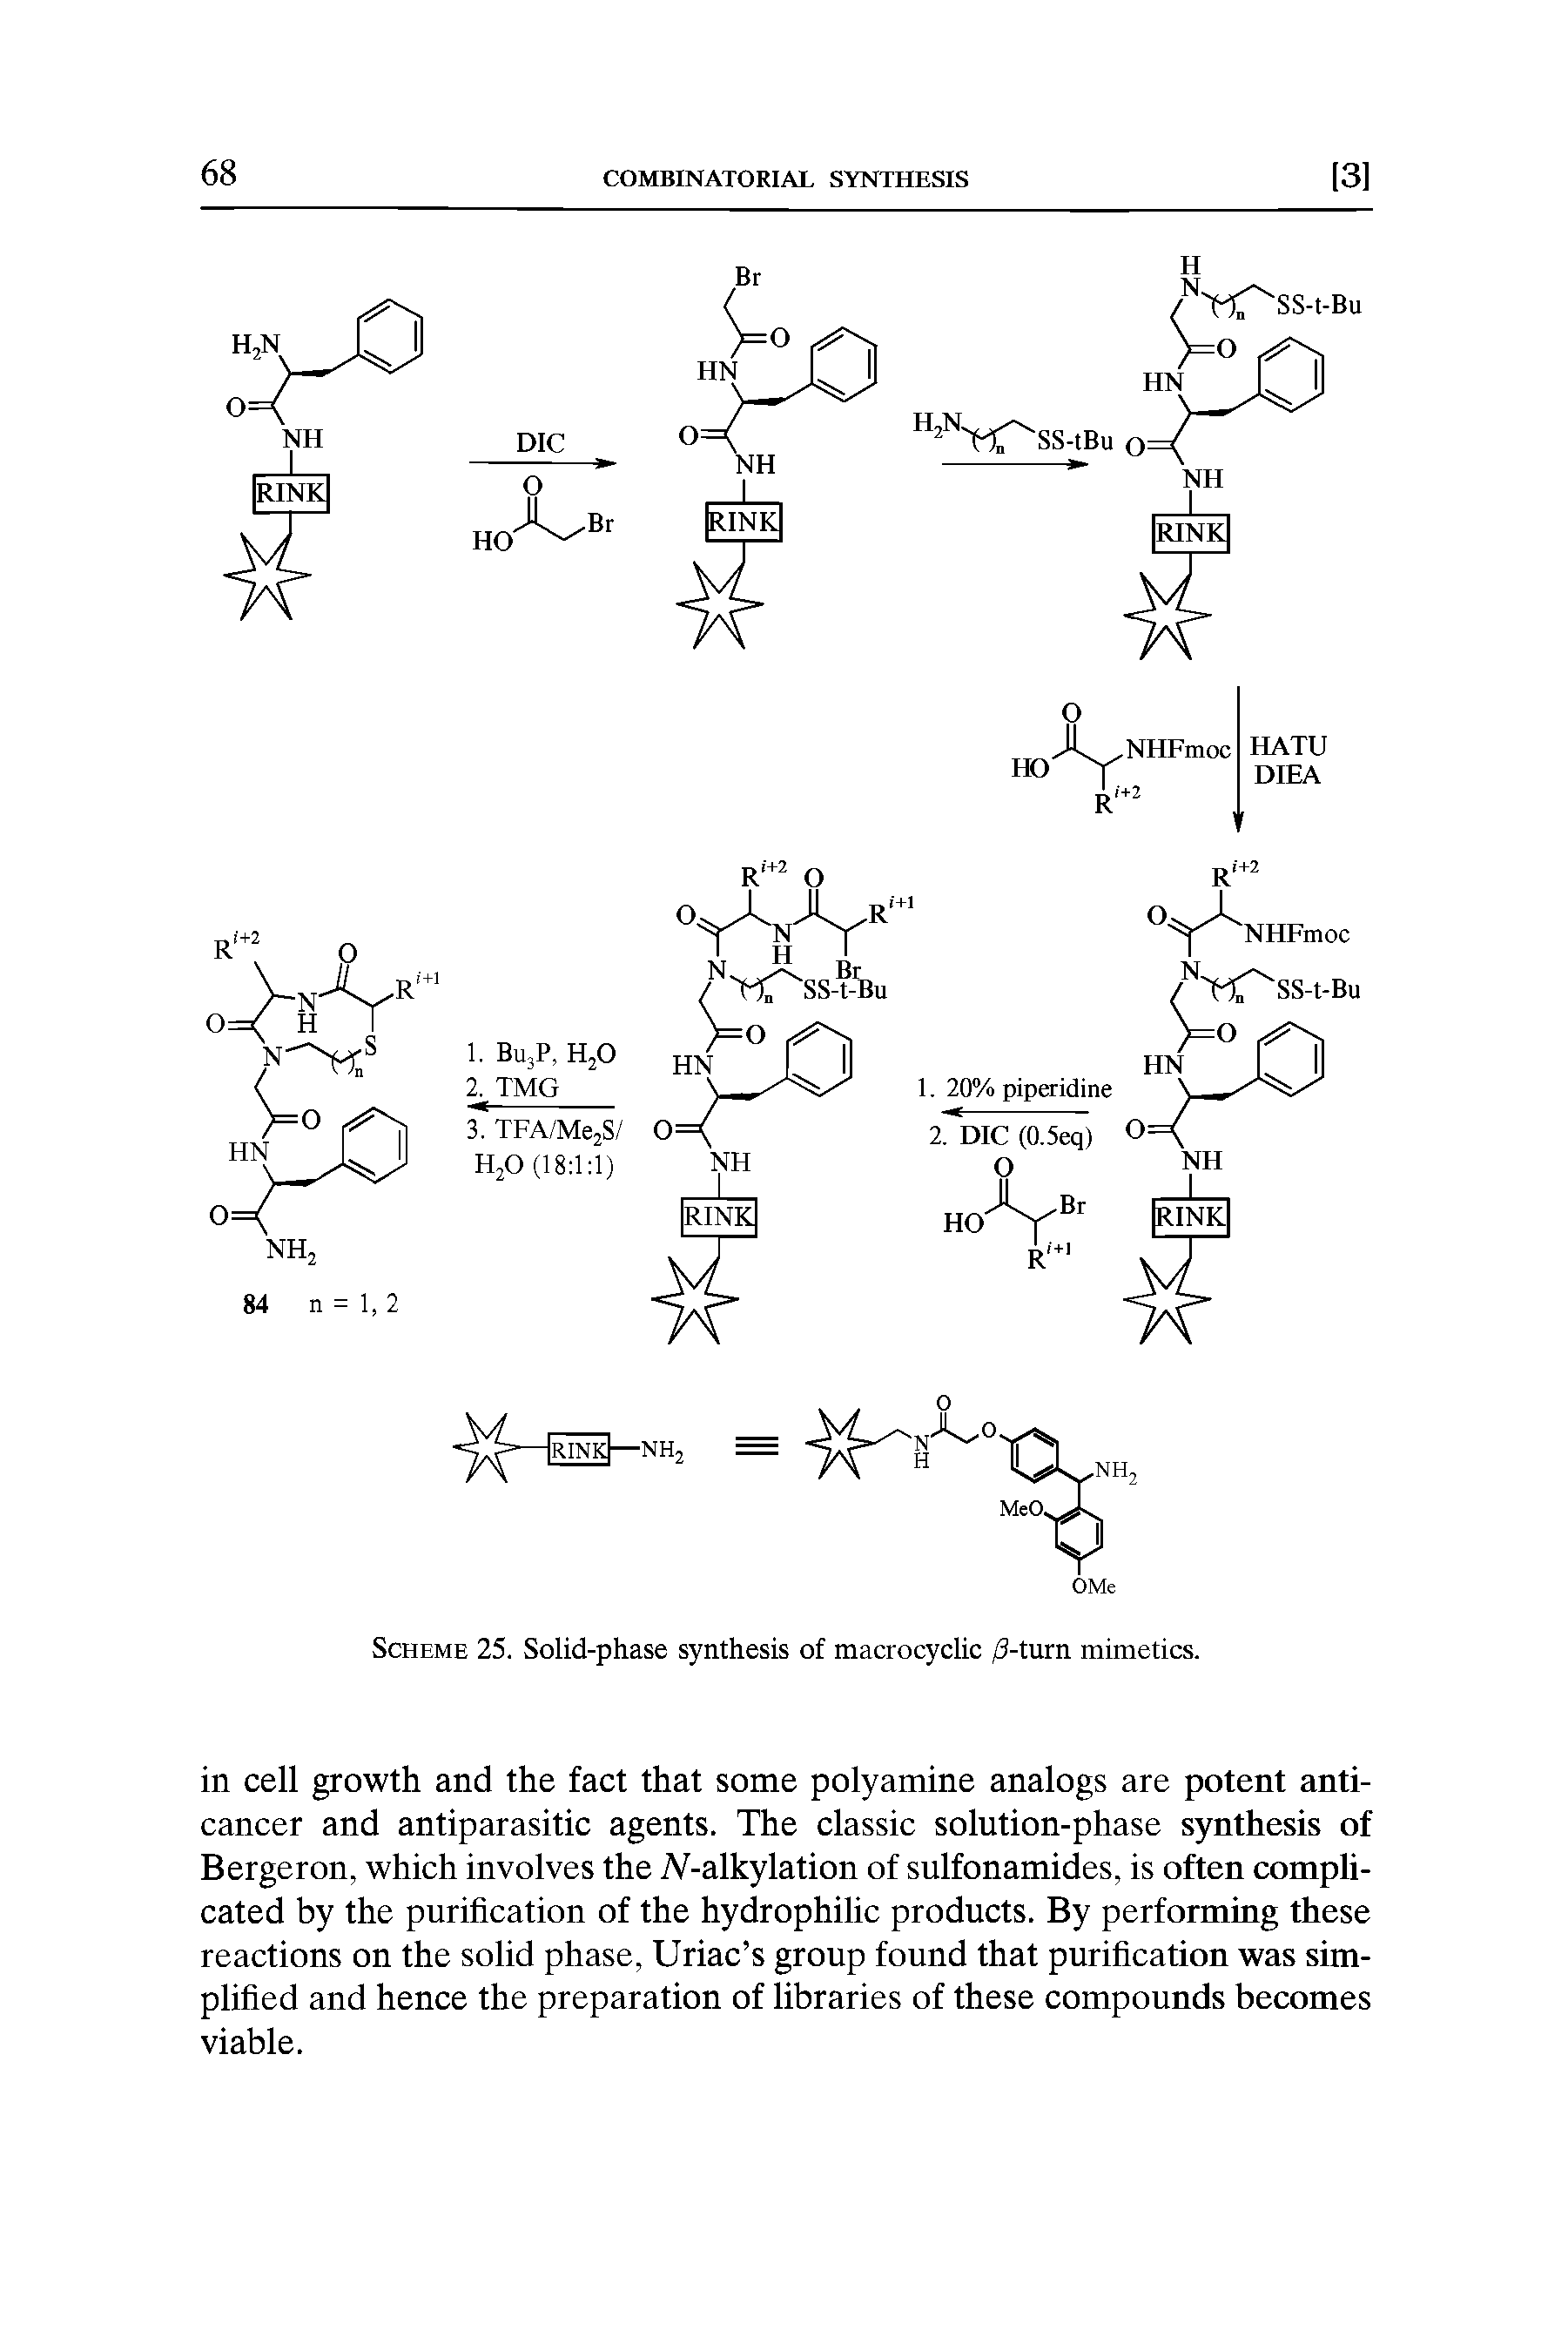 Scheme 25. Solid-phase synthesis of macrocyclic /3-turn mimetics.